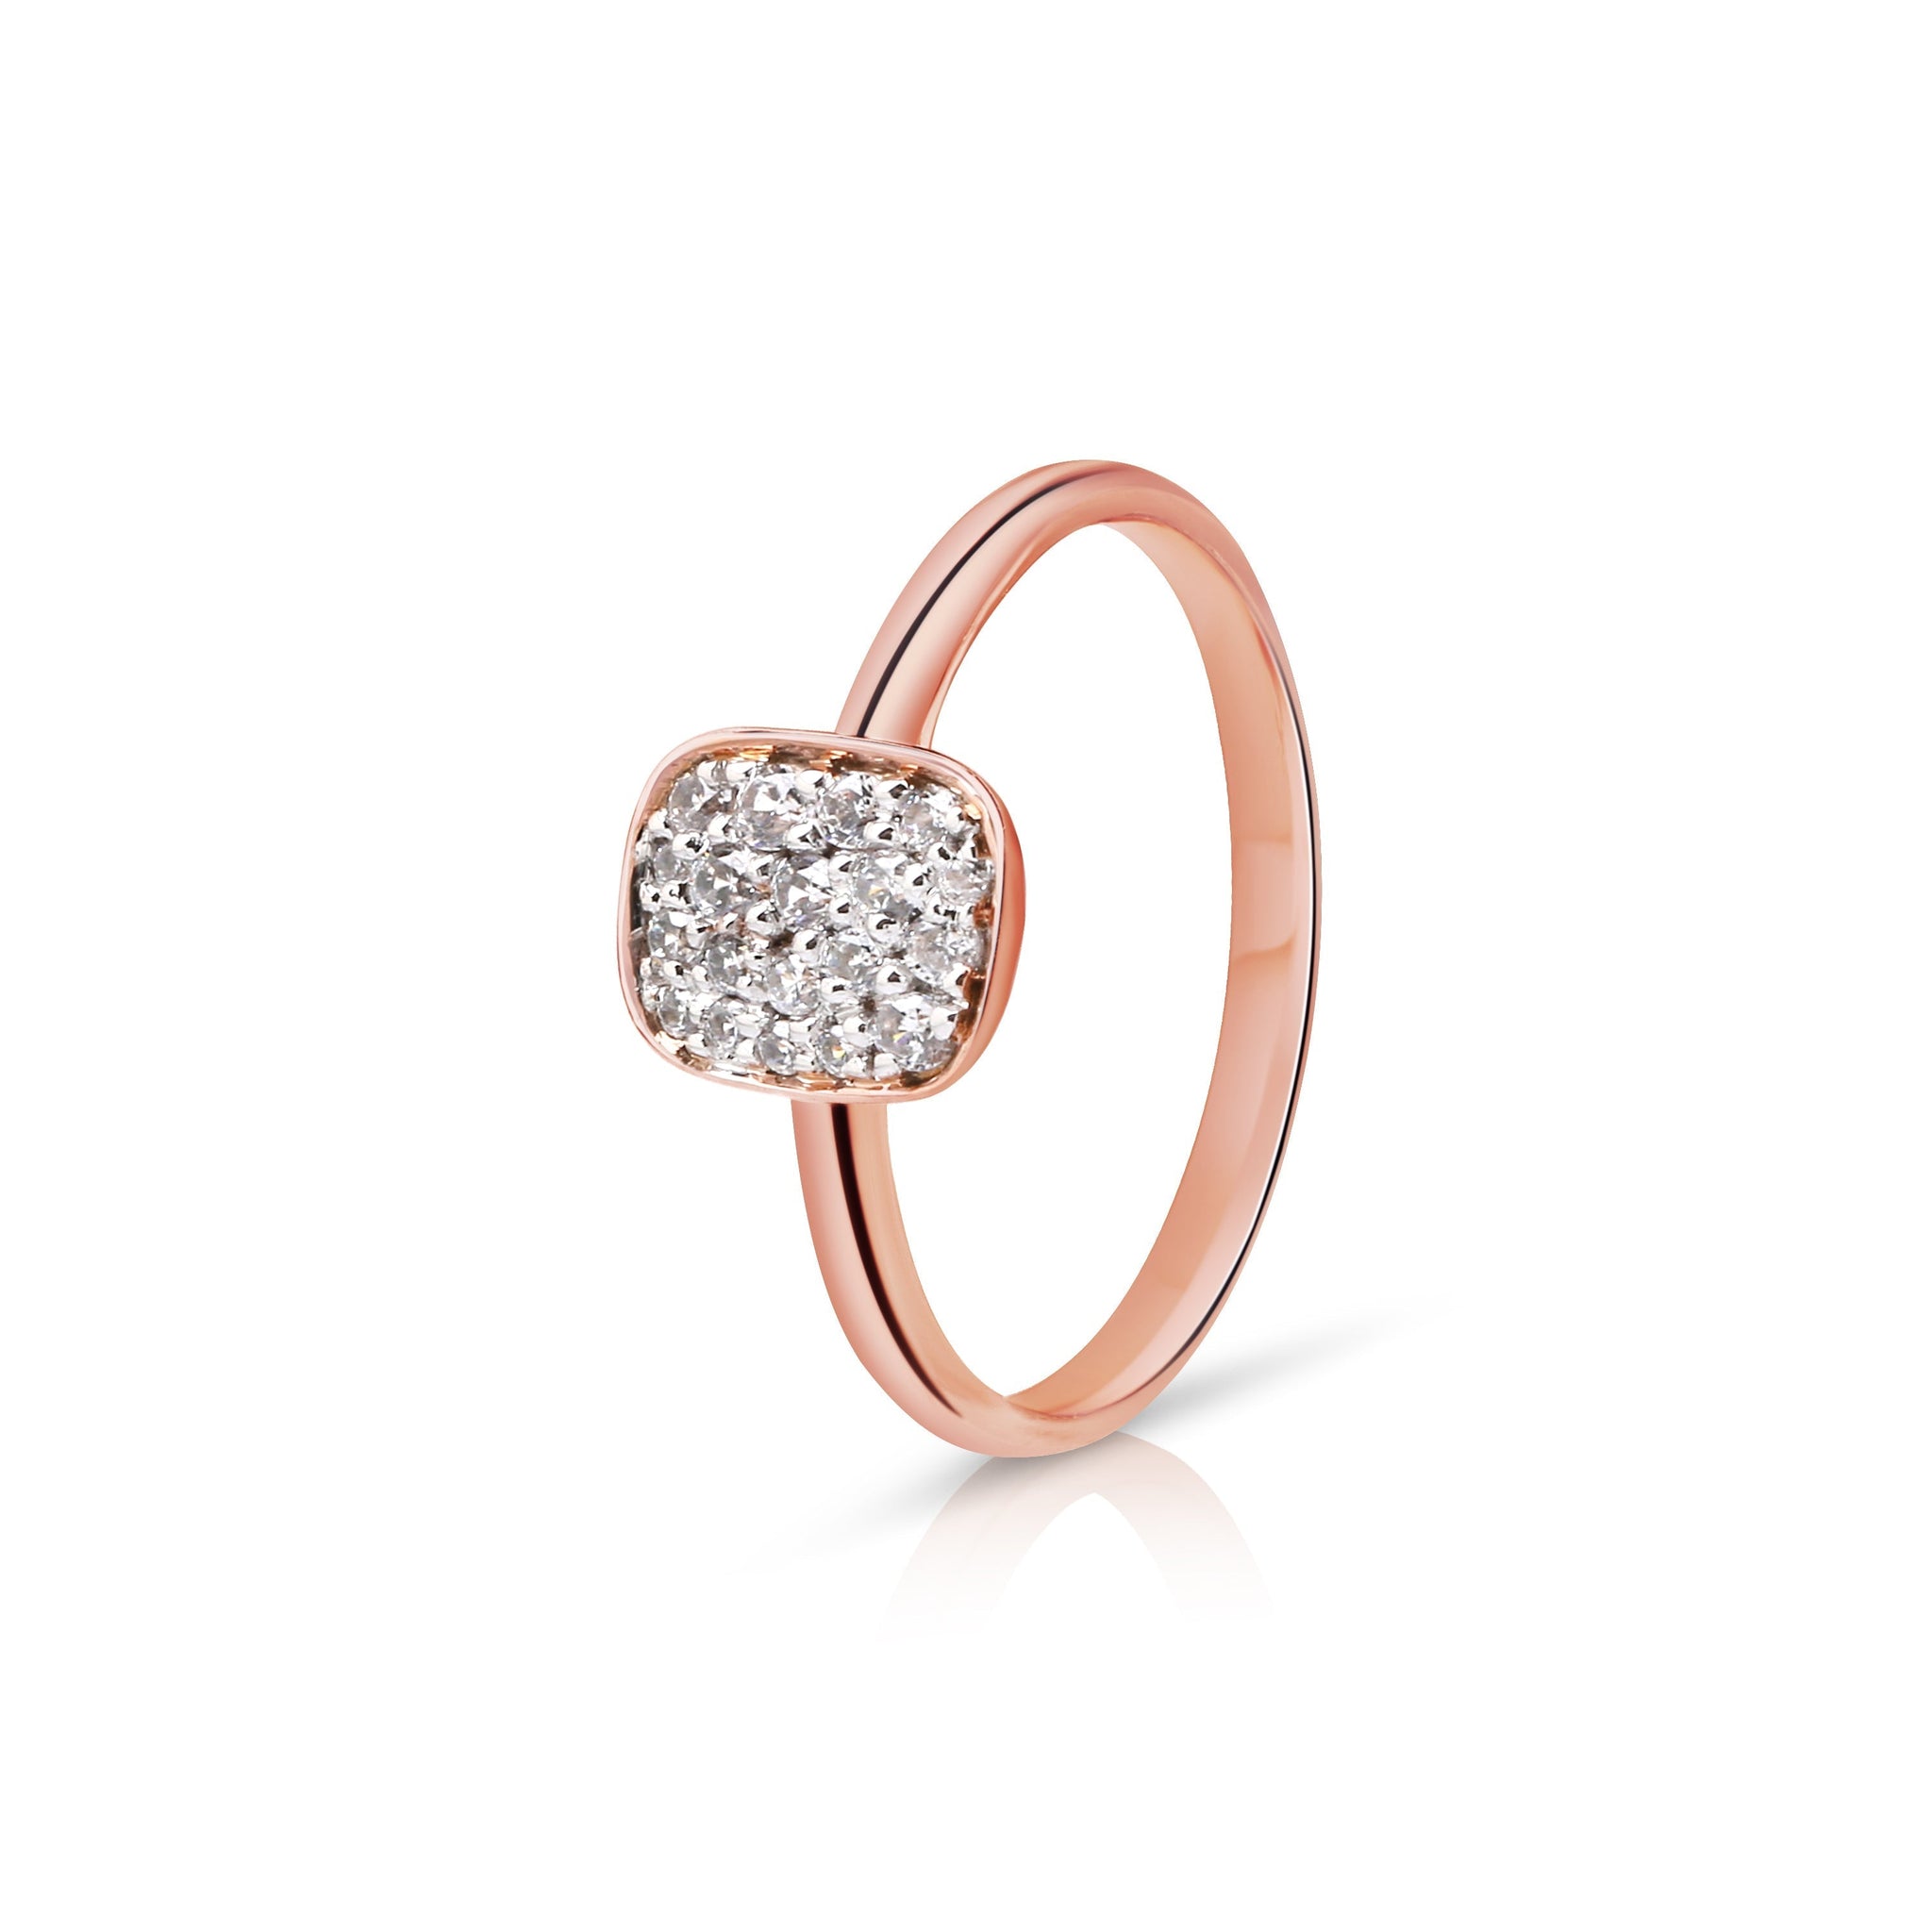 The Show Stopper Ring - Classic